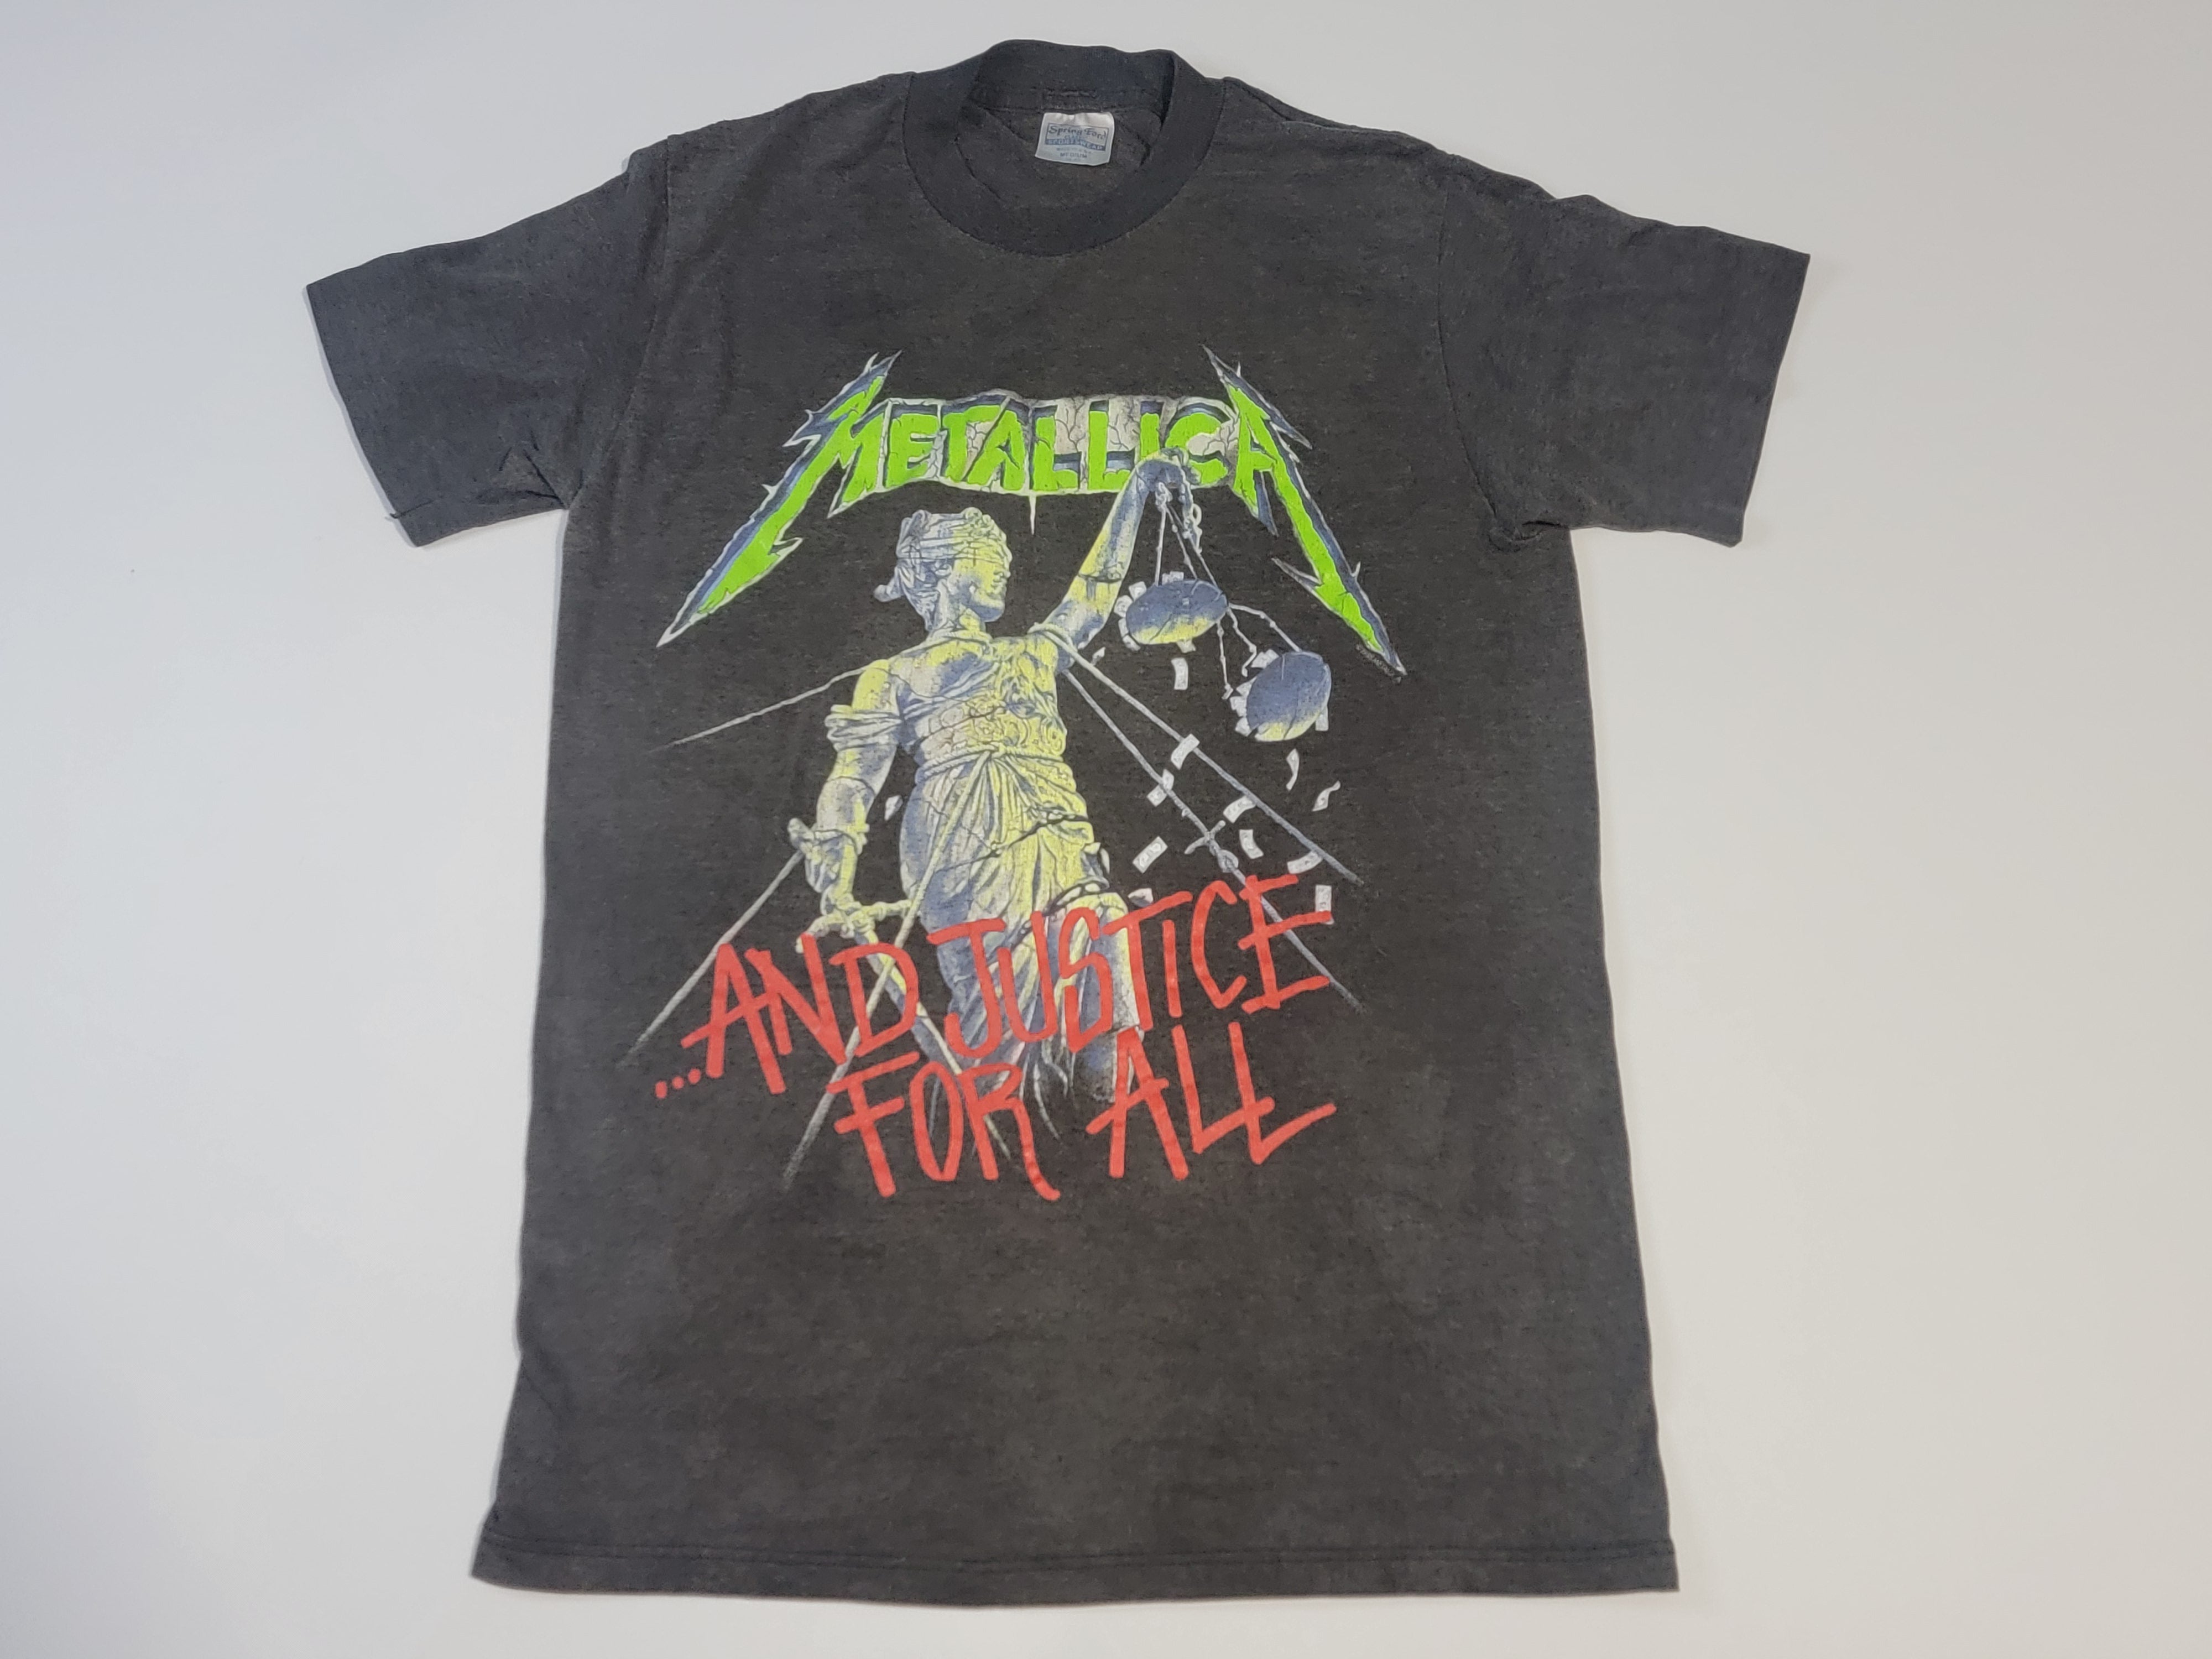 Metallica And Justice For All Tour '89 Vintage 80's Single Stitch 